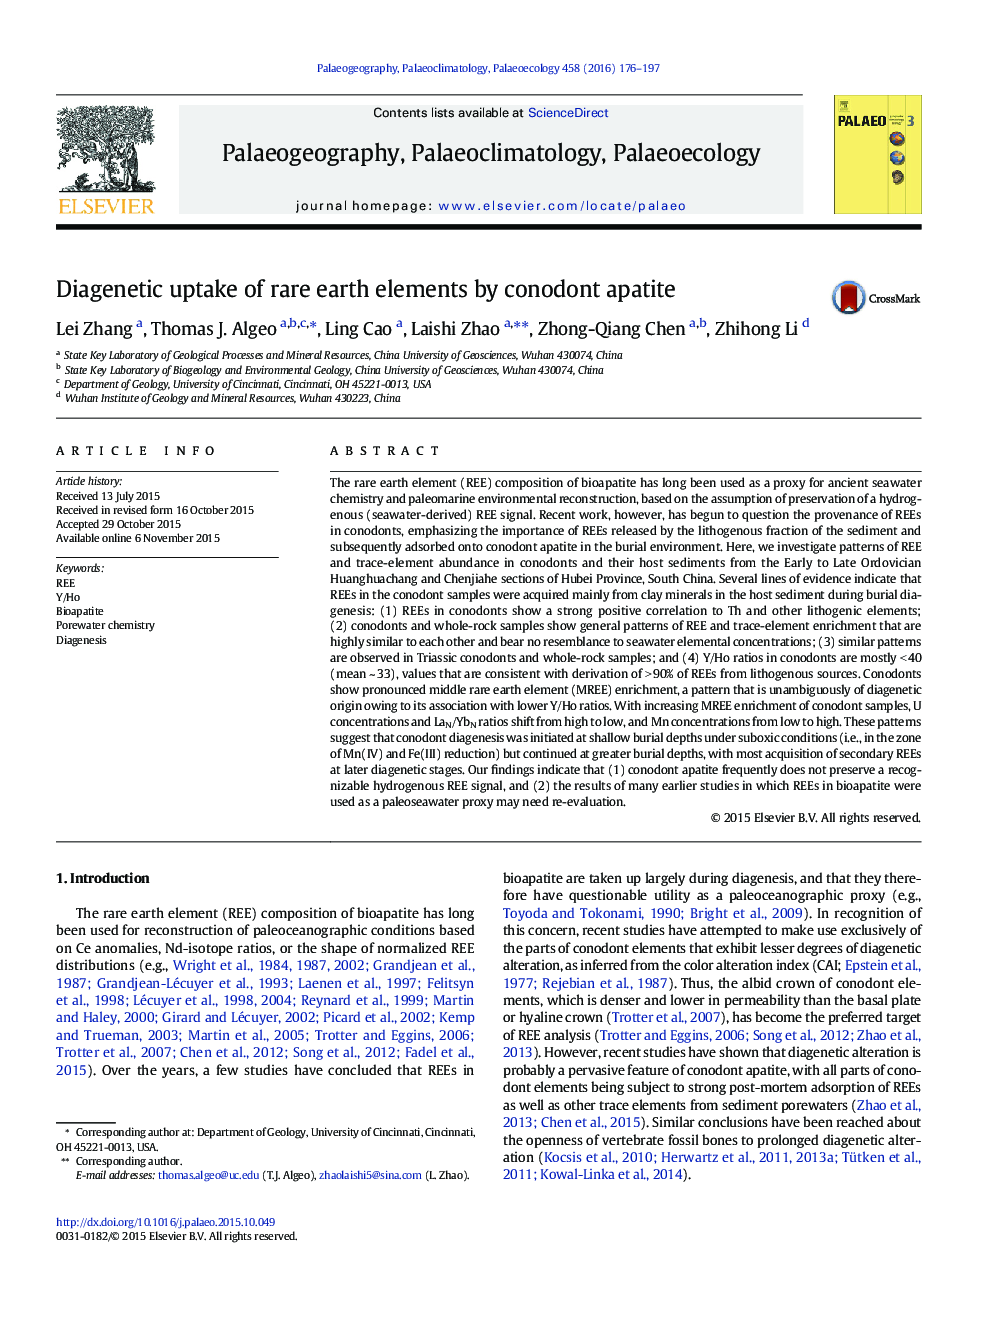 Diagenetic uptake of rare earth elements by conodont apatite